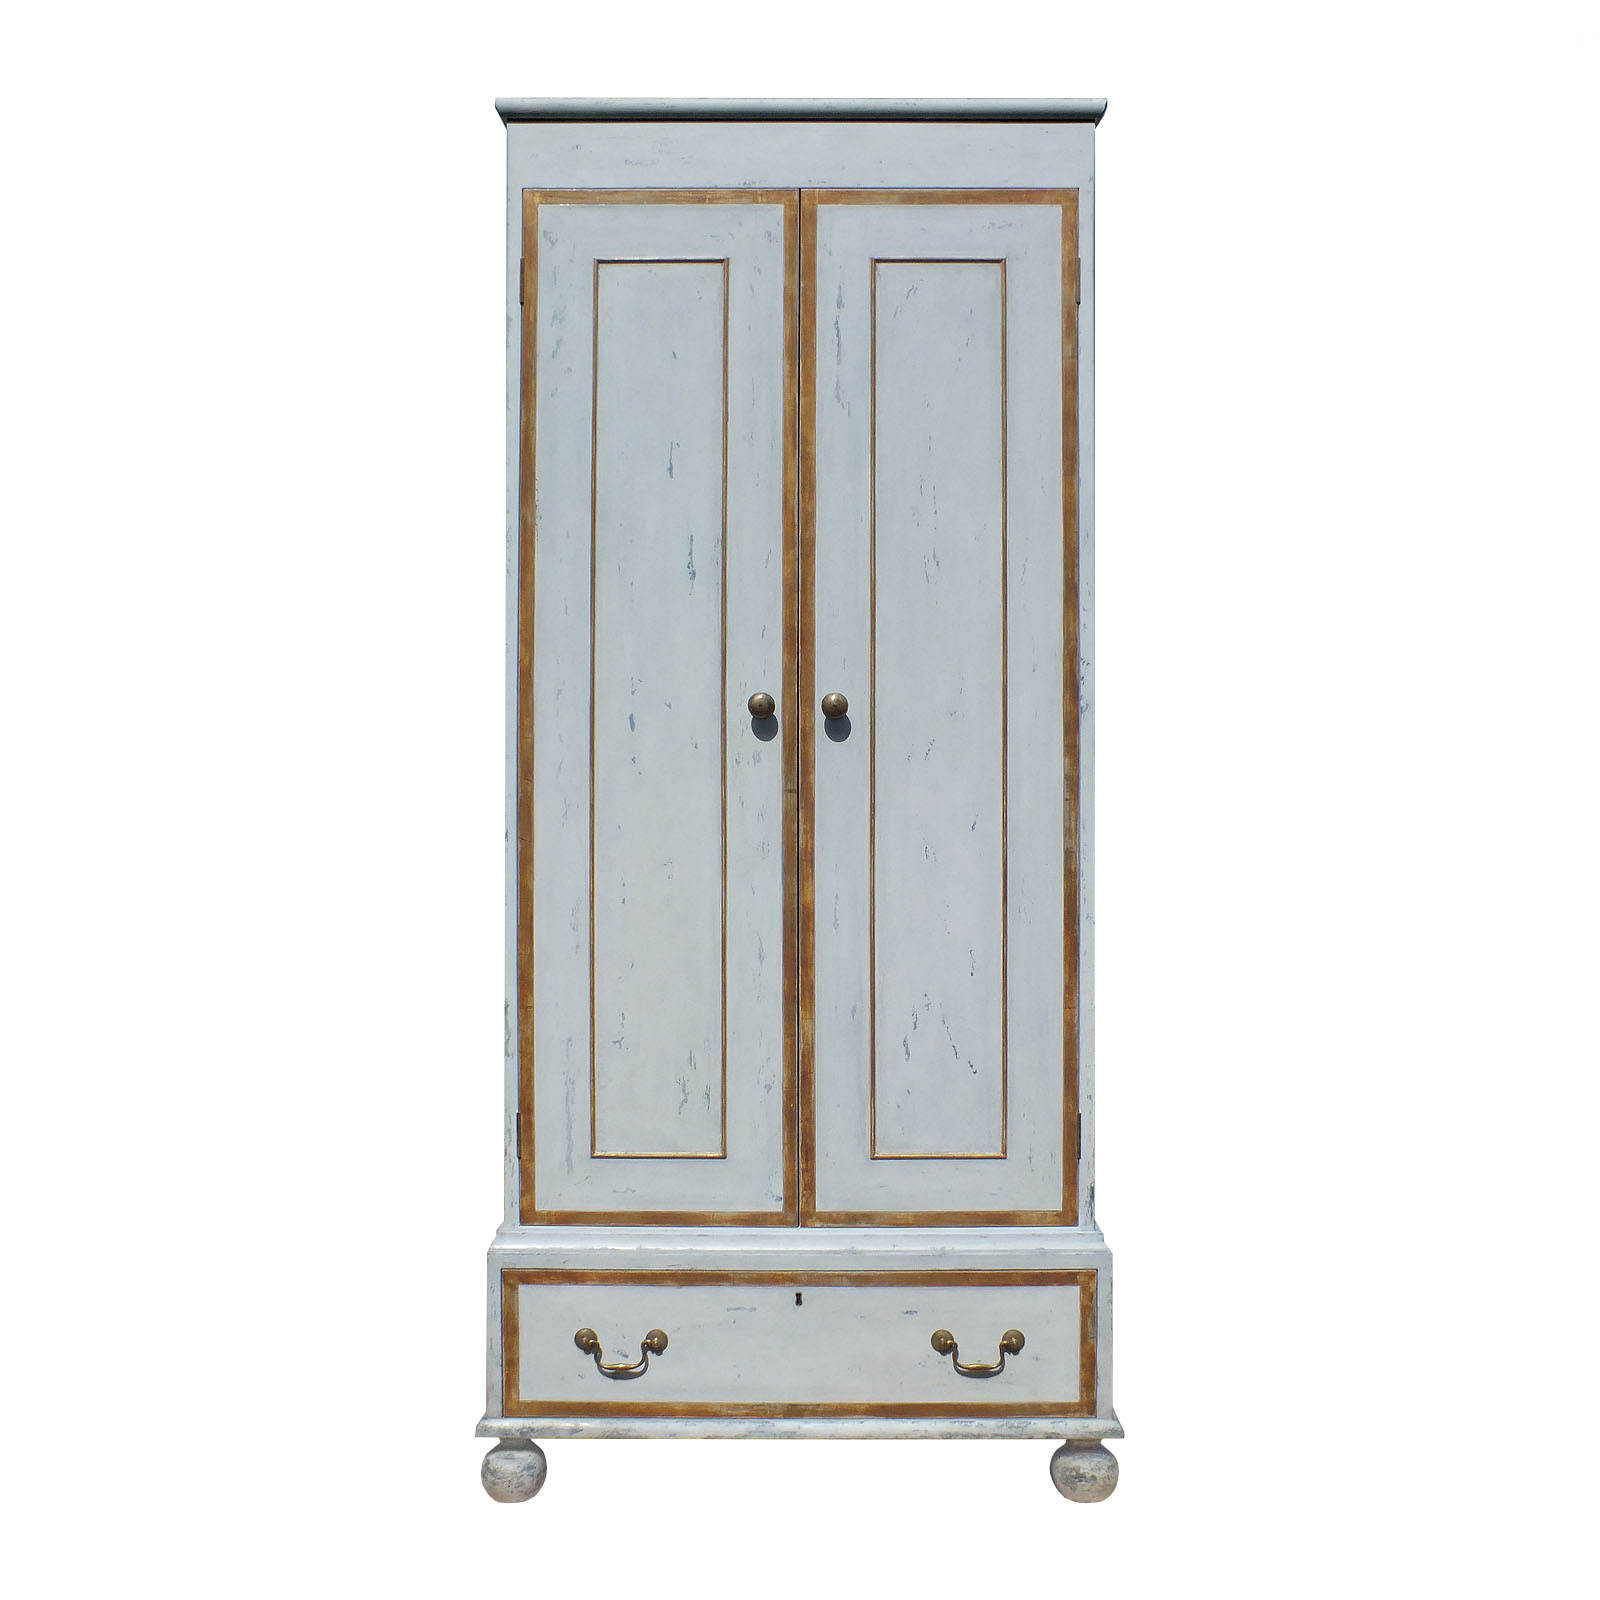 Painted and Gilt Wardrobe. Made to order by Perceval Designs